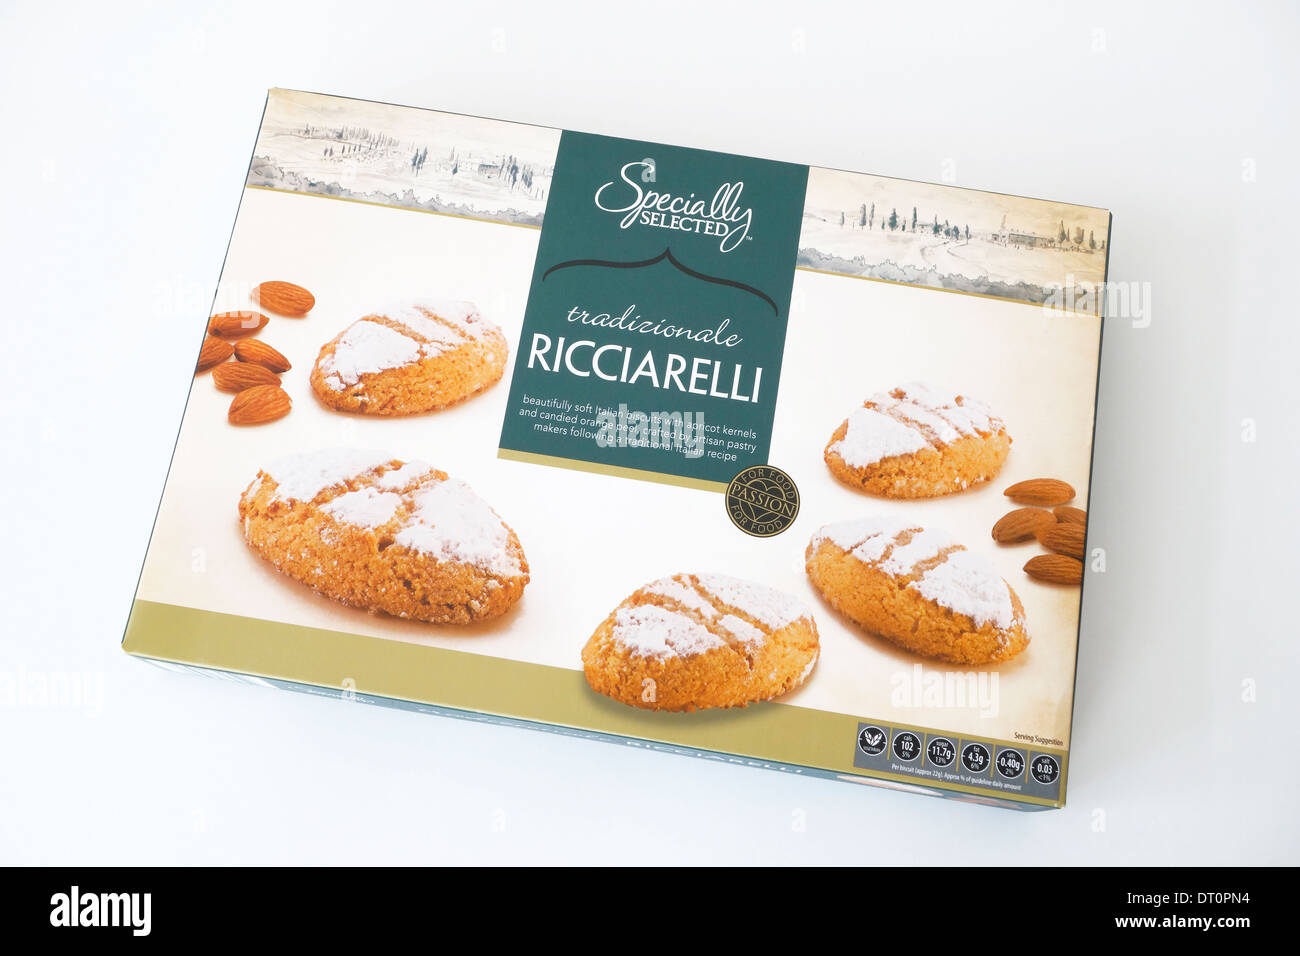 Box of Aldi Specially Selected Ricciarelli Biscuits on a White Background Stock Photo